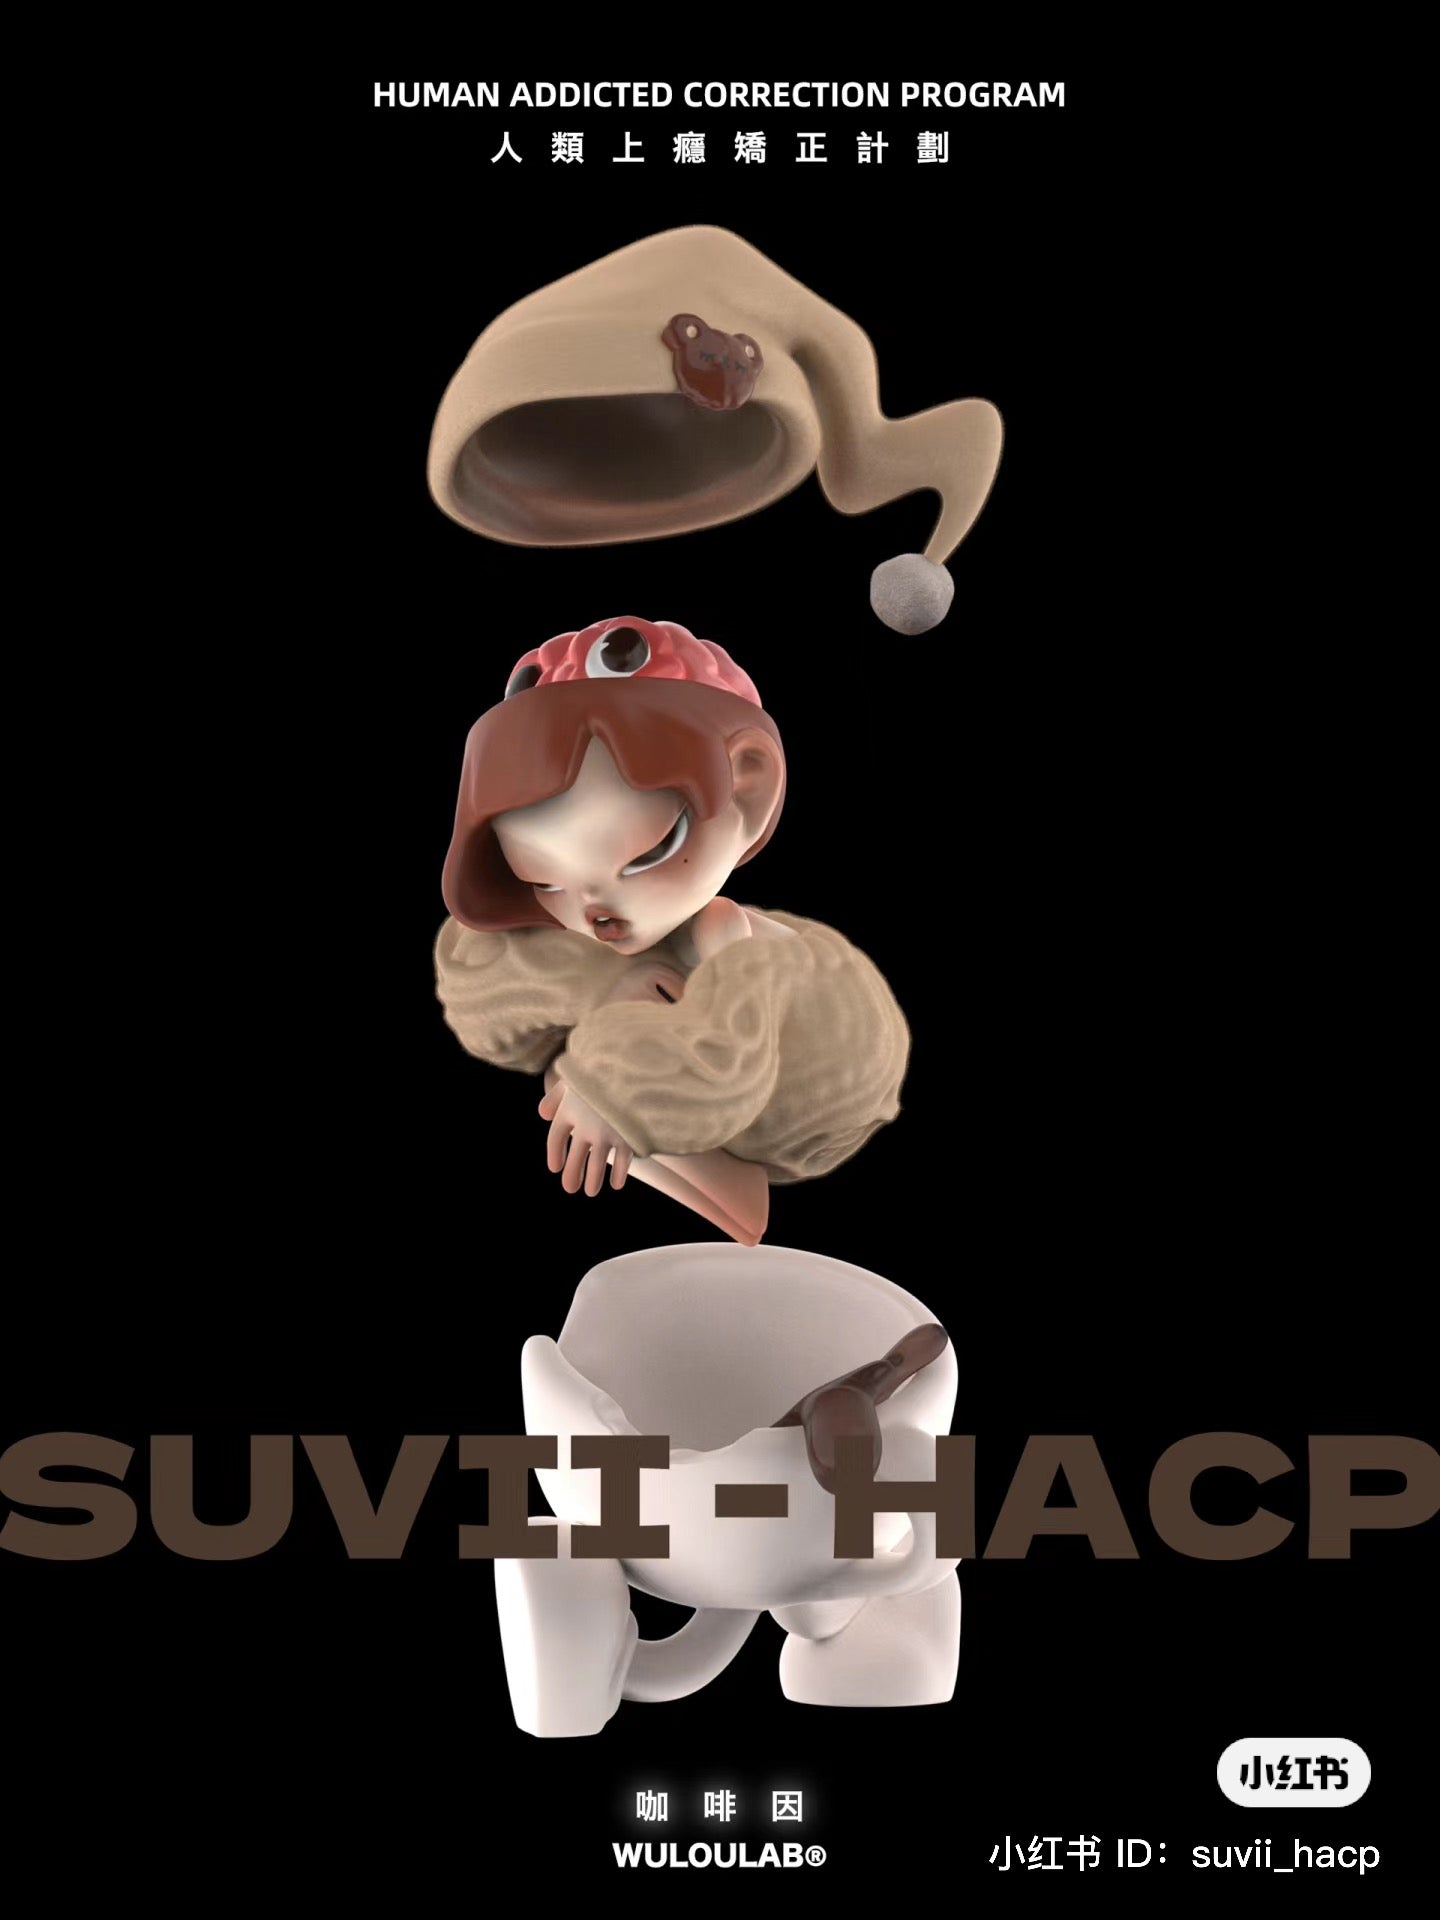 A blind box series featuring SUVII- Human Addicted Correction Program with 6 regular designs and 2 secret designs. Cartoon character with a pink hat and brain, white object with brown letters, and a brown bear on a hat.